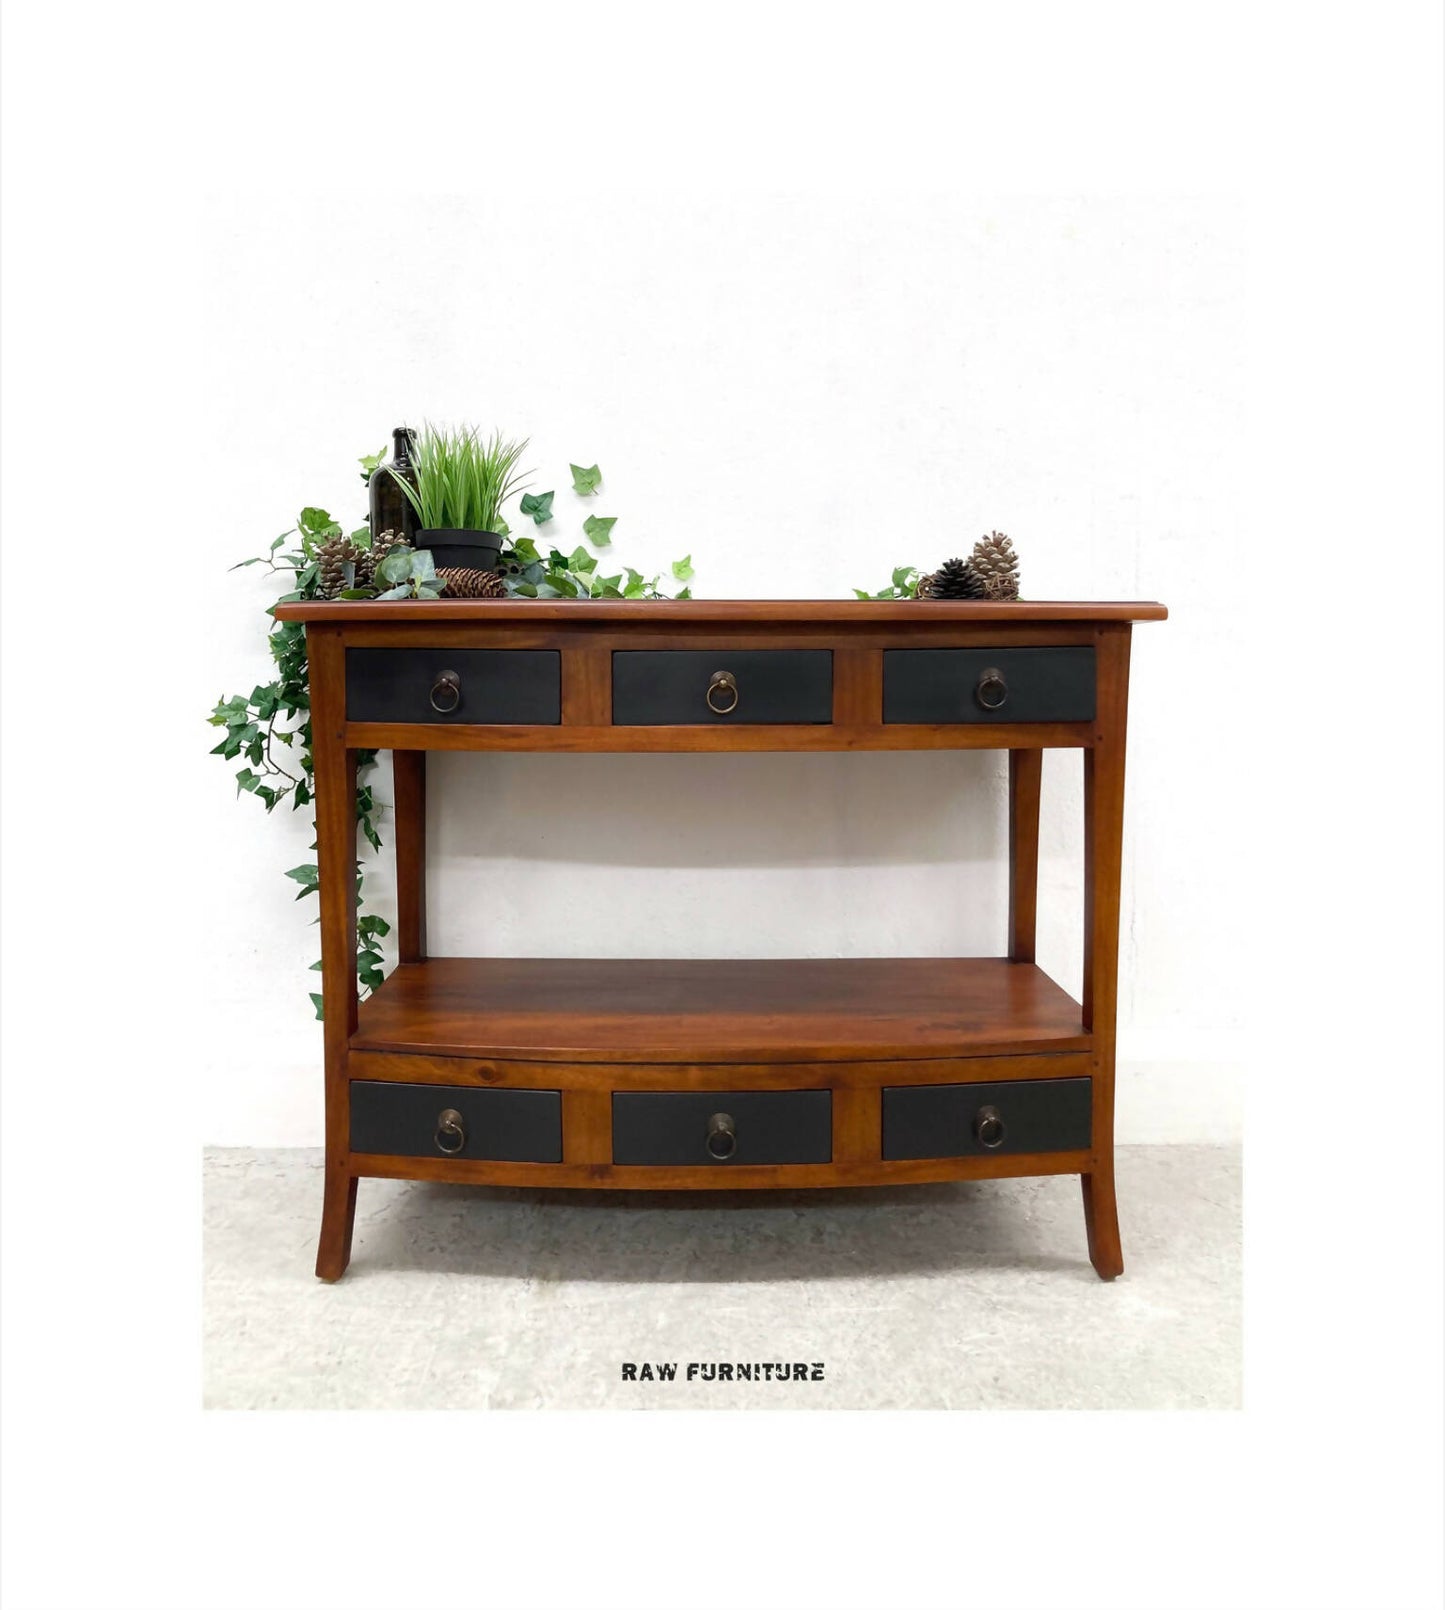 LARGE CONSOLE TABLE